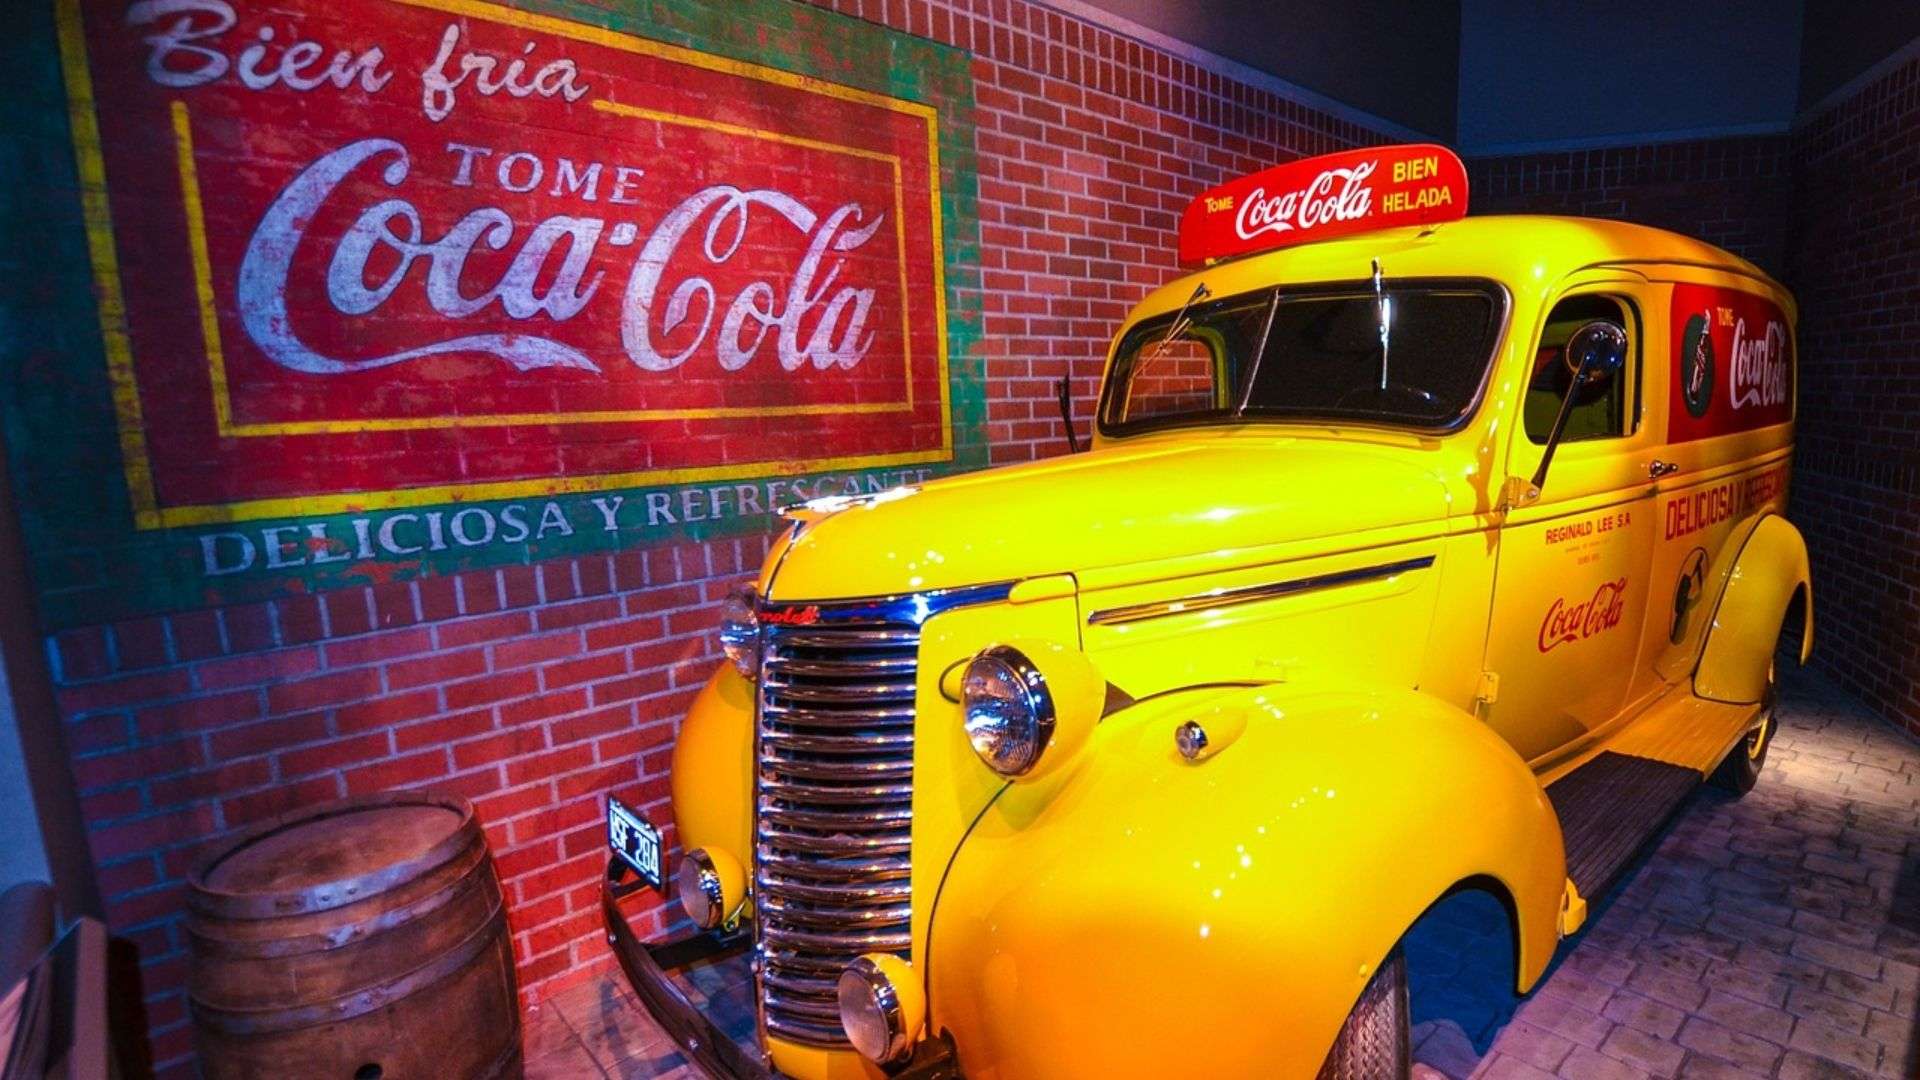 The World of Coca-Cola is an iconic attraction located in Atlanta, GA.